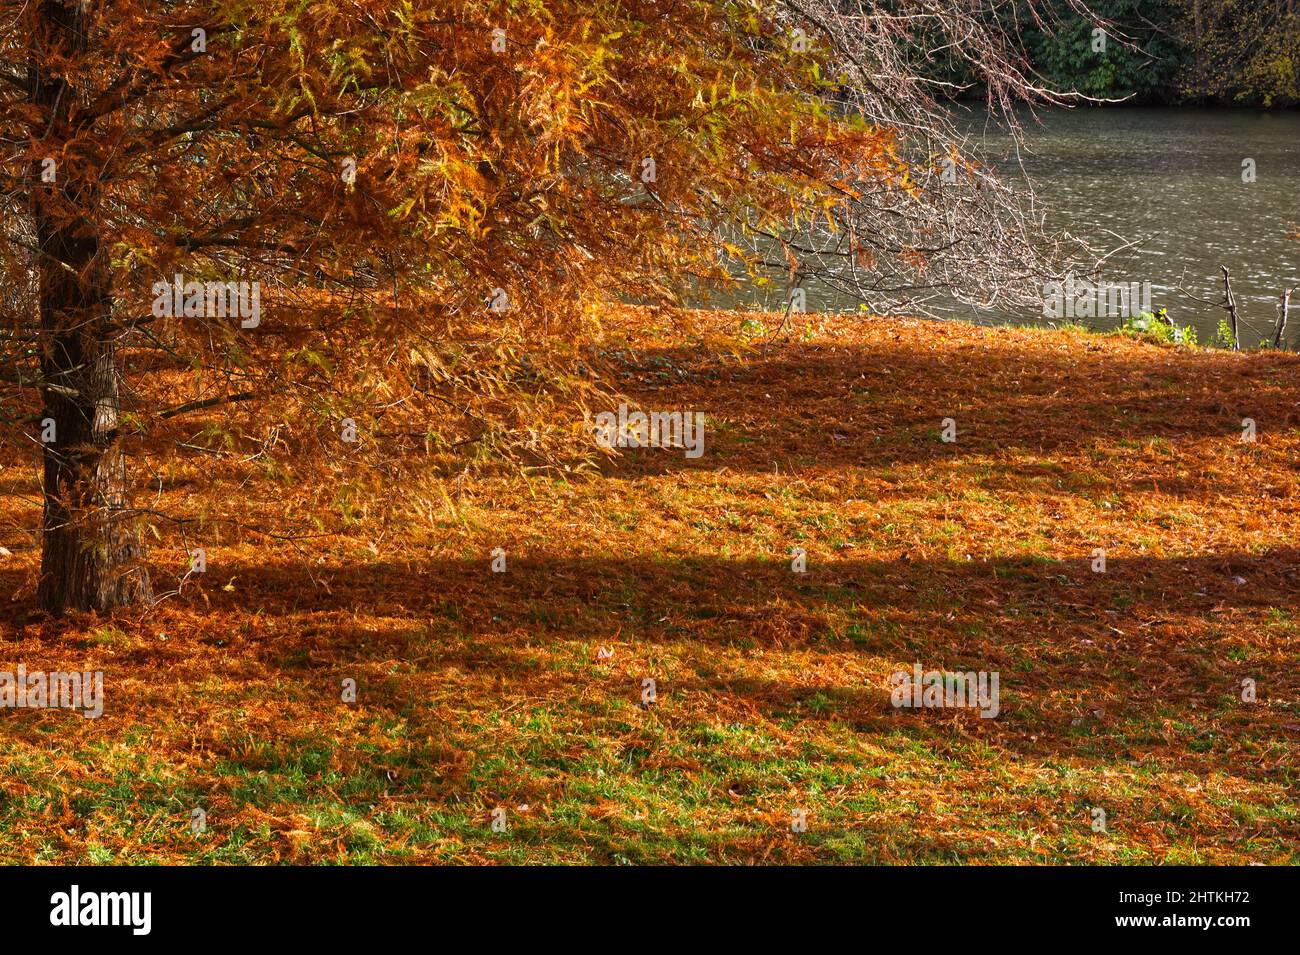 Autumn (Fall) colours from fallen leaves and needles under trees. Stock Photo